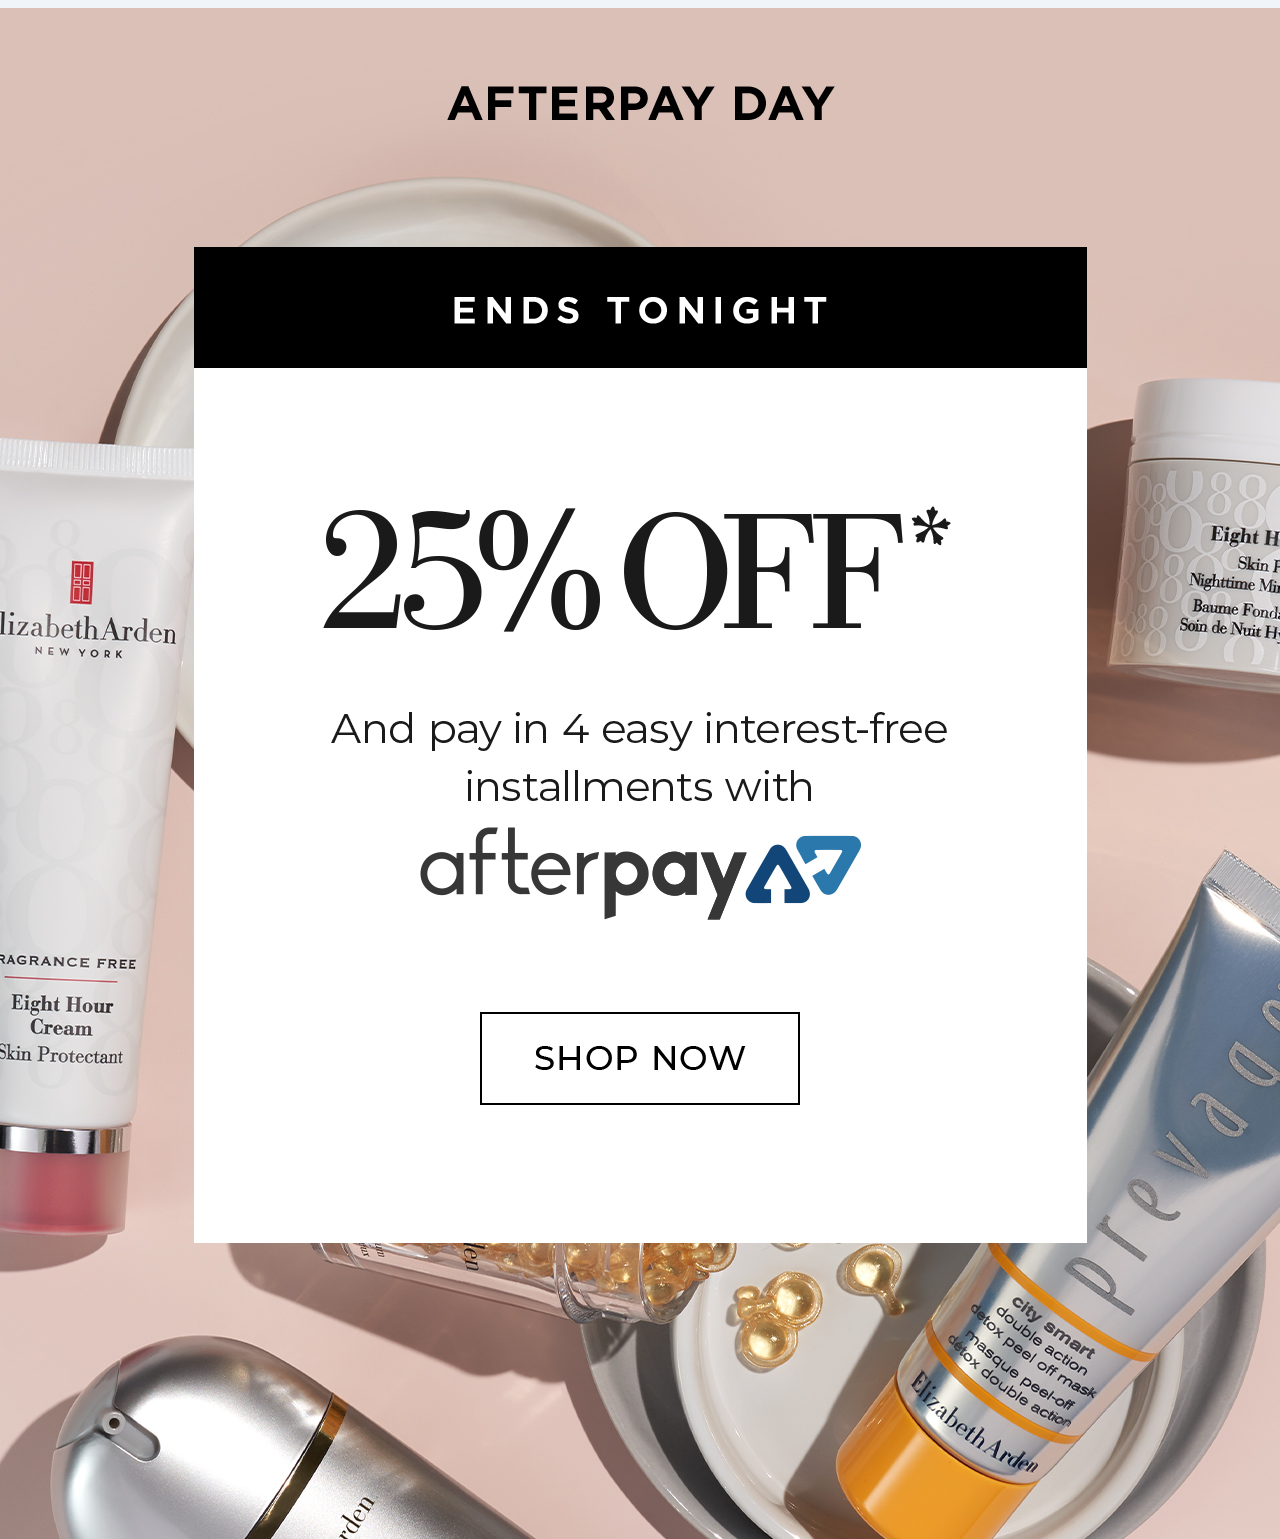 AFTERPAY DAY ENDS TONIGHT 25% OFF* And pay in 4 easy interest-free  installments with afterpay SHOP NOW